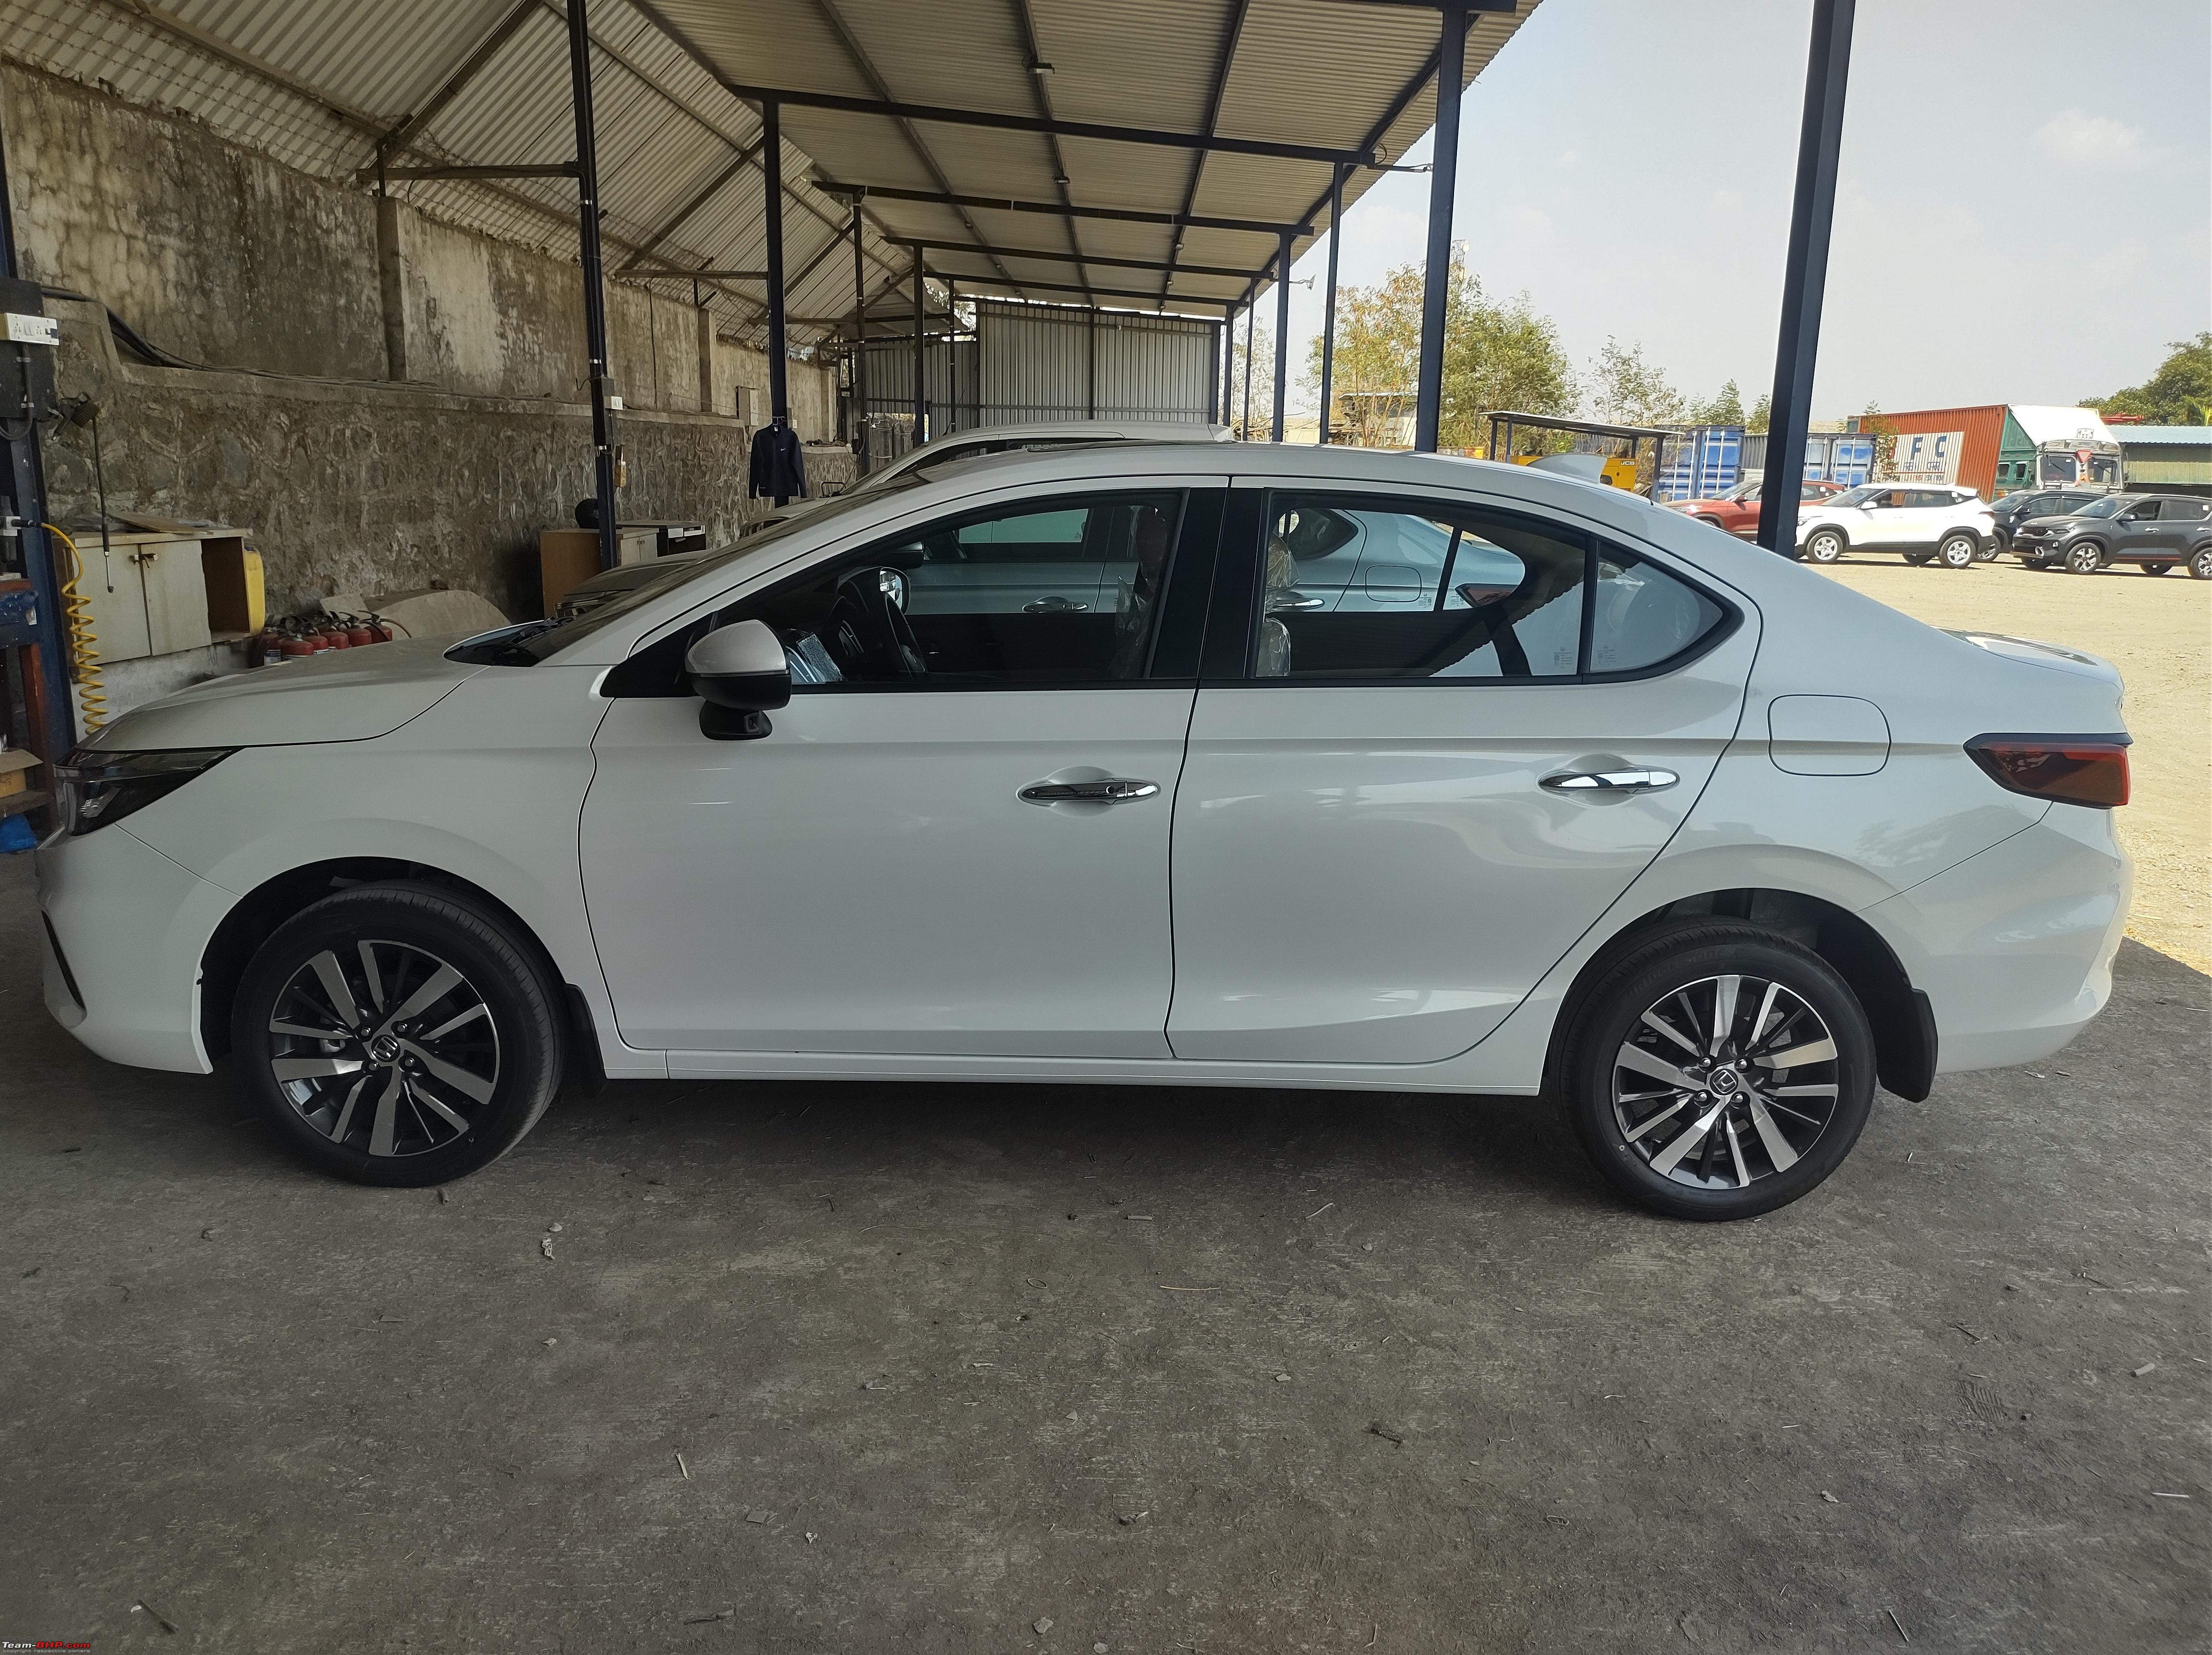 https://www.team-bhp.com/forum/attachments/indian-car-scene/2308649d1652714728-5th-gen-honda-city-india-edit-review-page-62-img_20220503_143144008_hdr.jpg